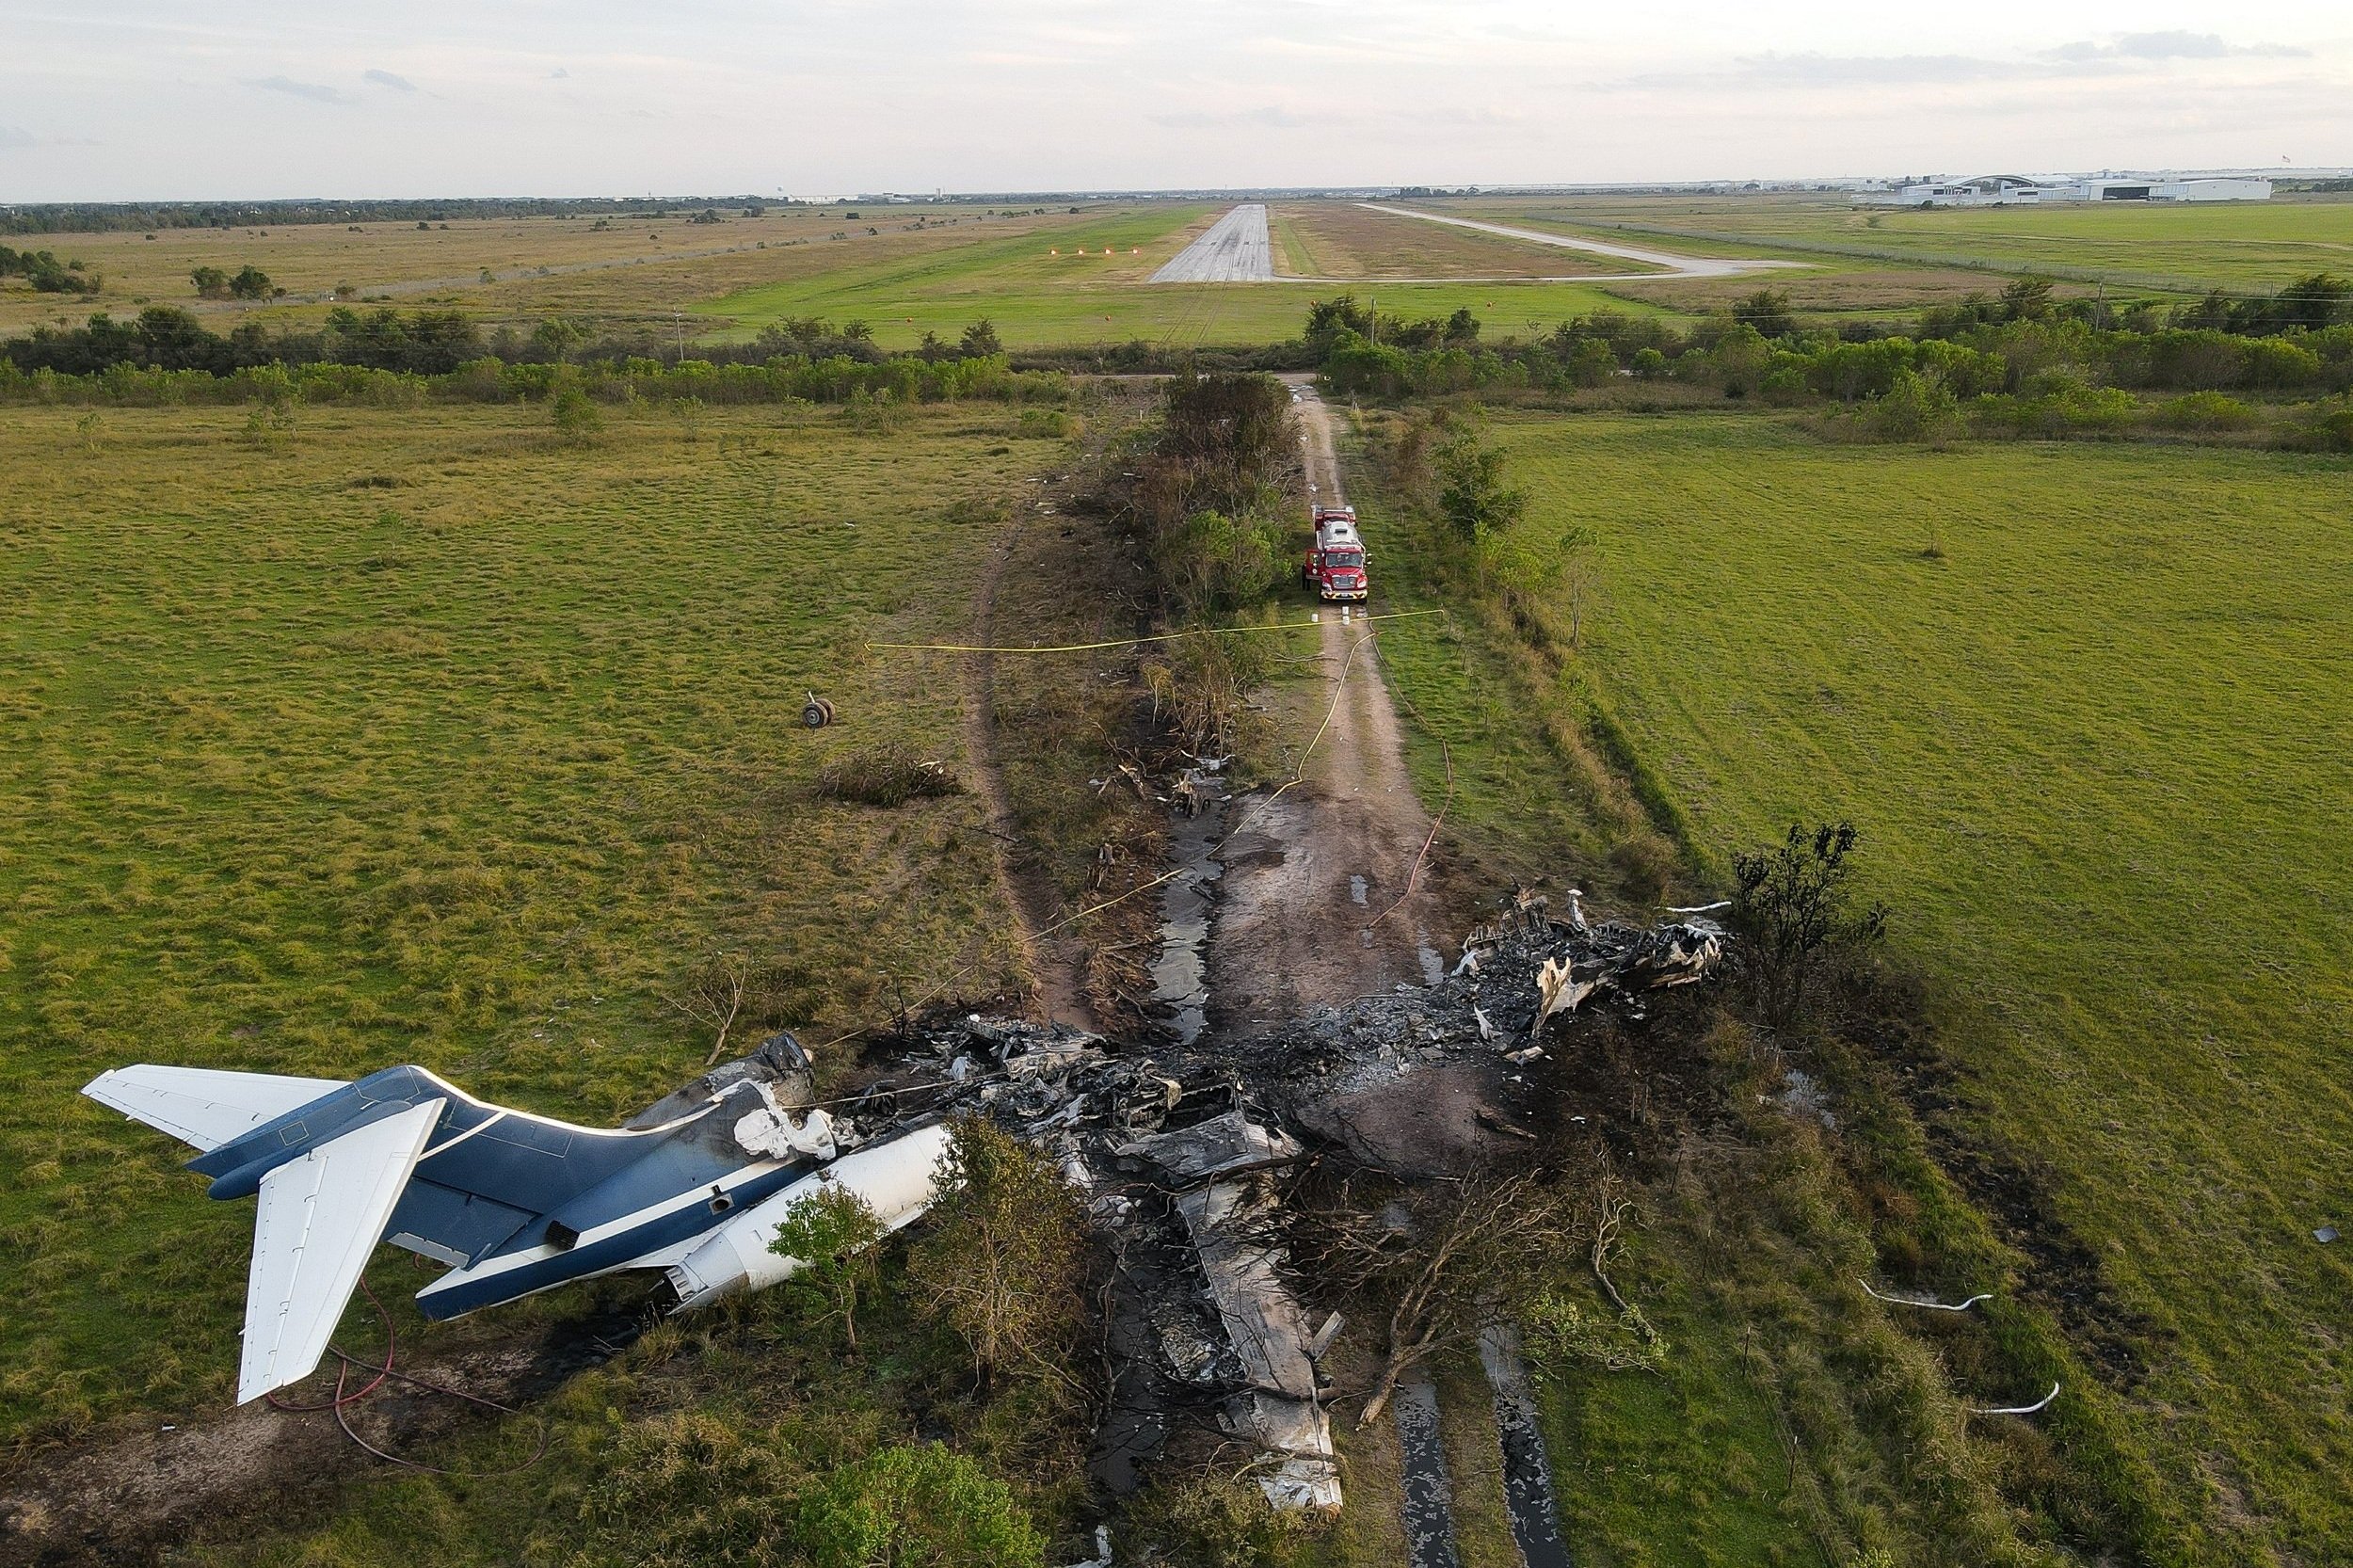  The remnants of an aircraft, which caught fire soon after a failed take-off attempt at Houston Executive Airport, can be seen just north of Morton Road on Tuesday, Oct. 19, 2021, in Brookshire, Texas. 